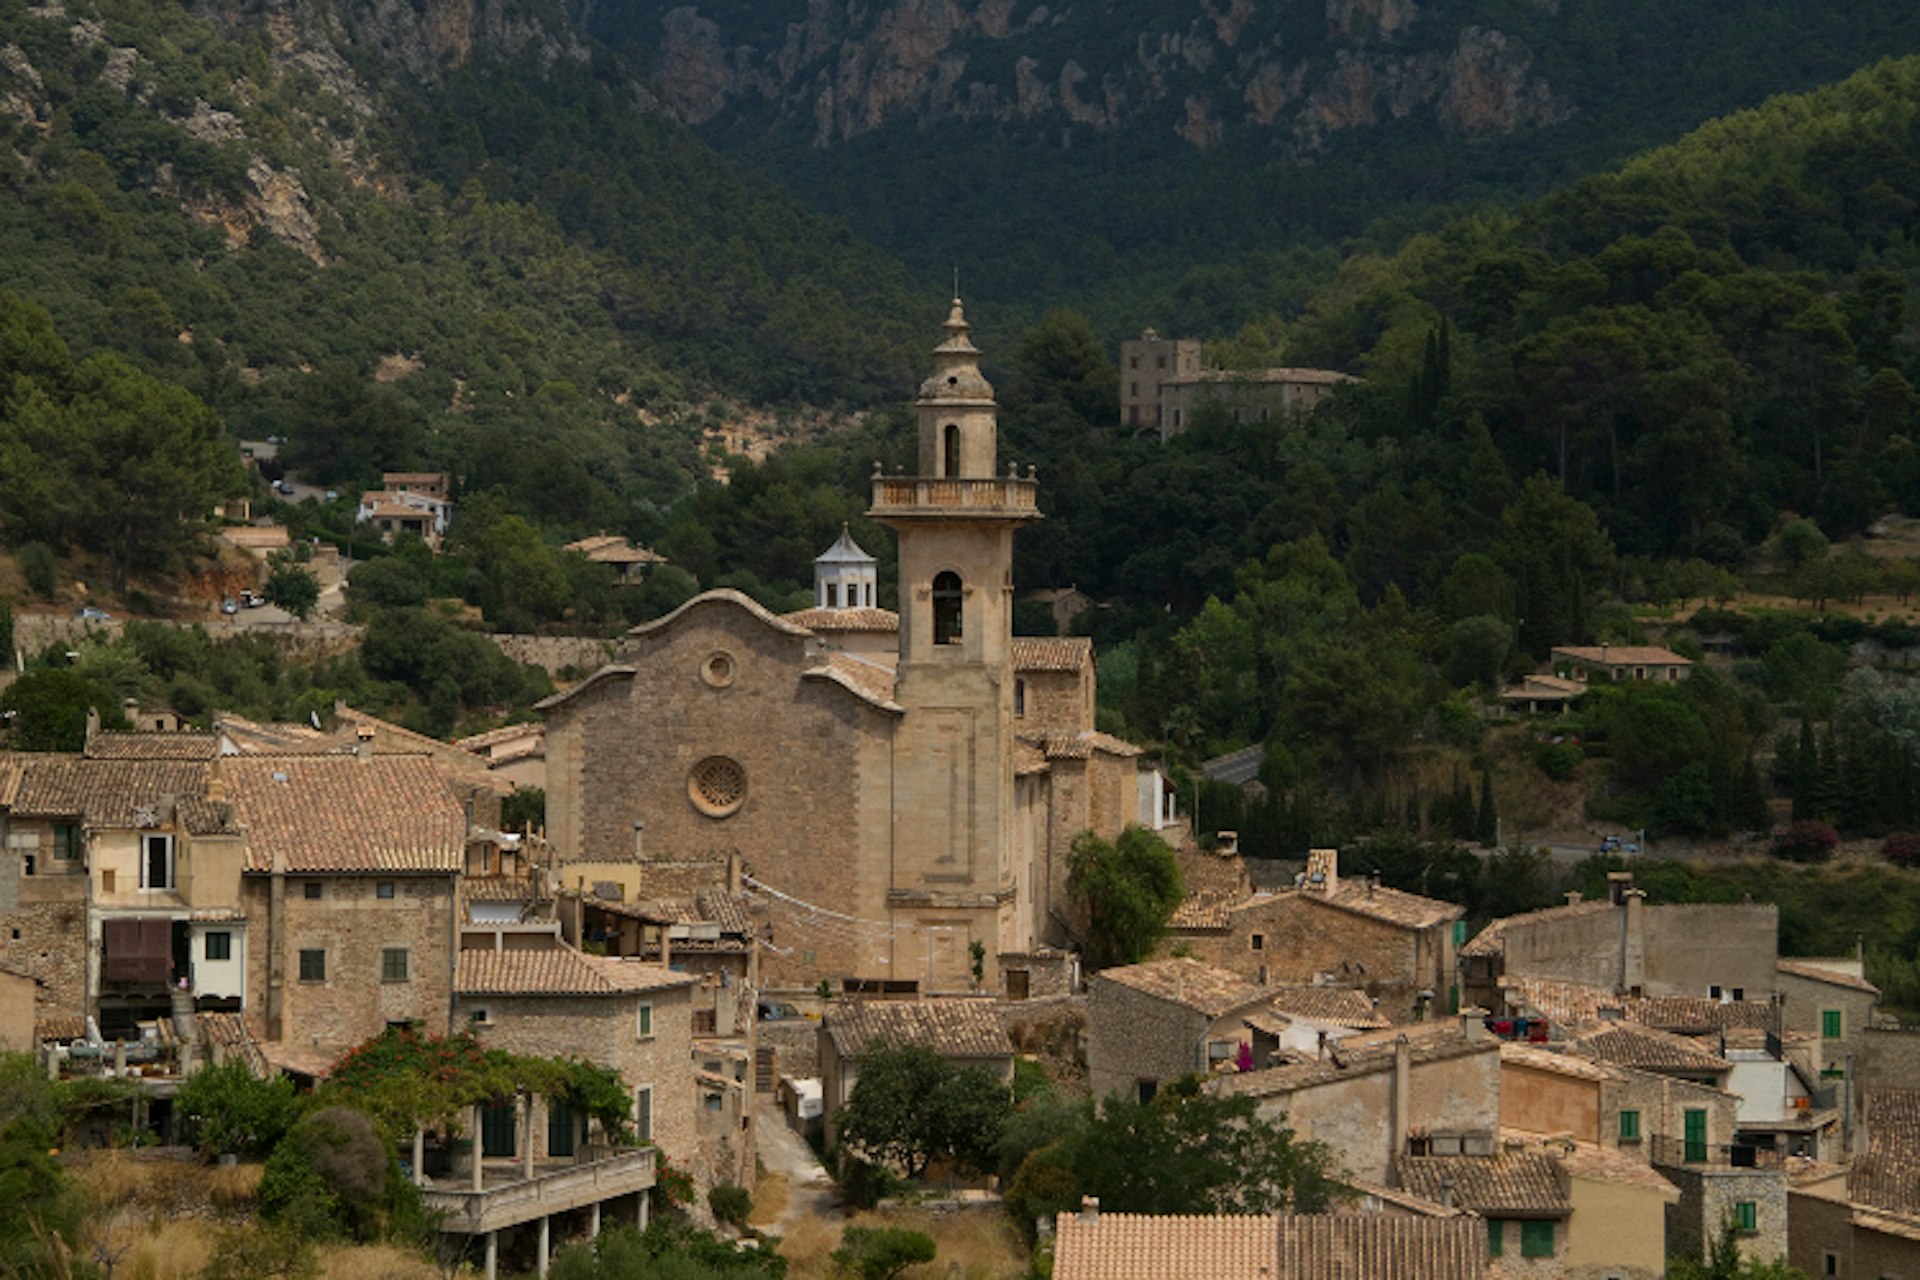 The beautiful town of Valldemossa. Image by Kerry Christiani / Lonely Planet